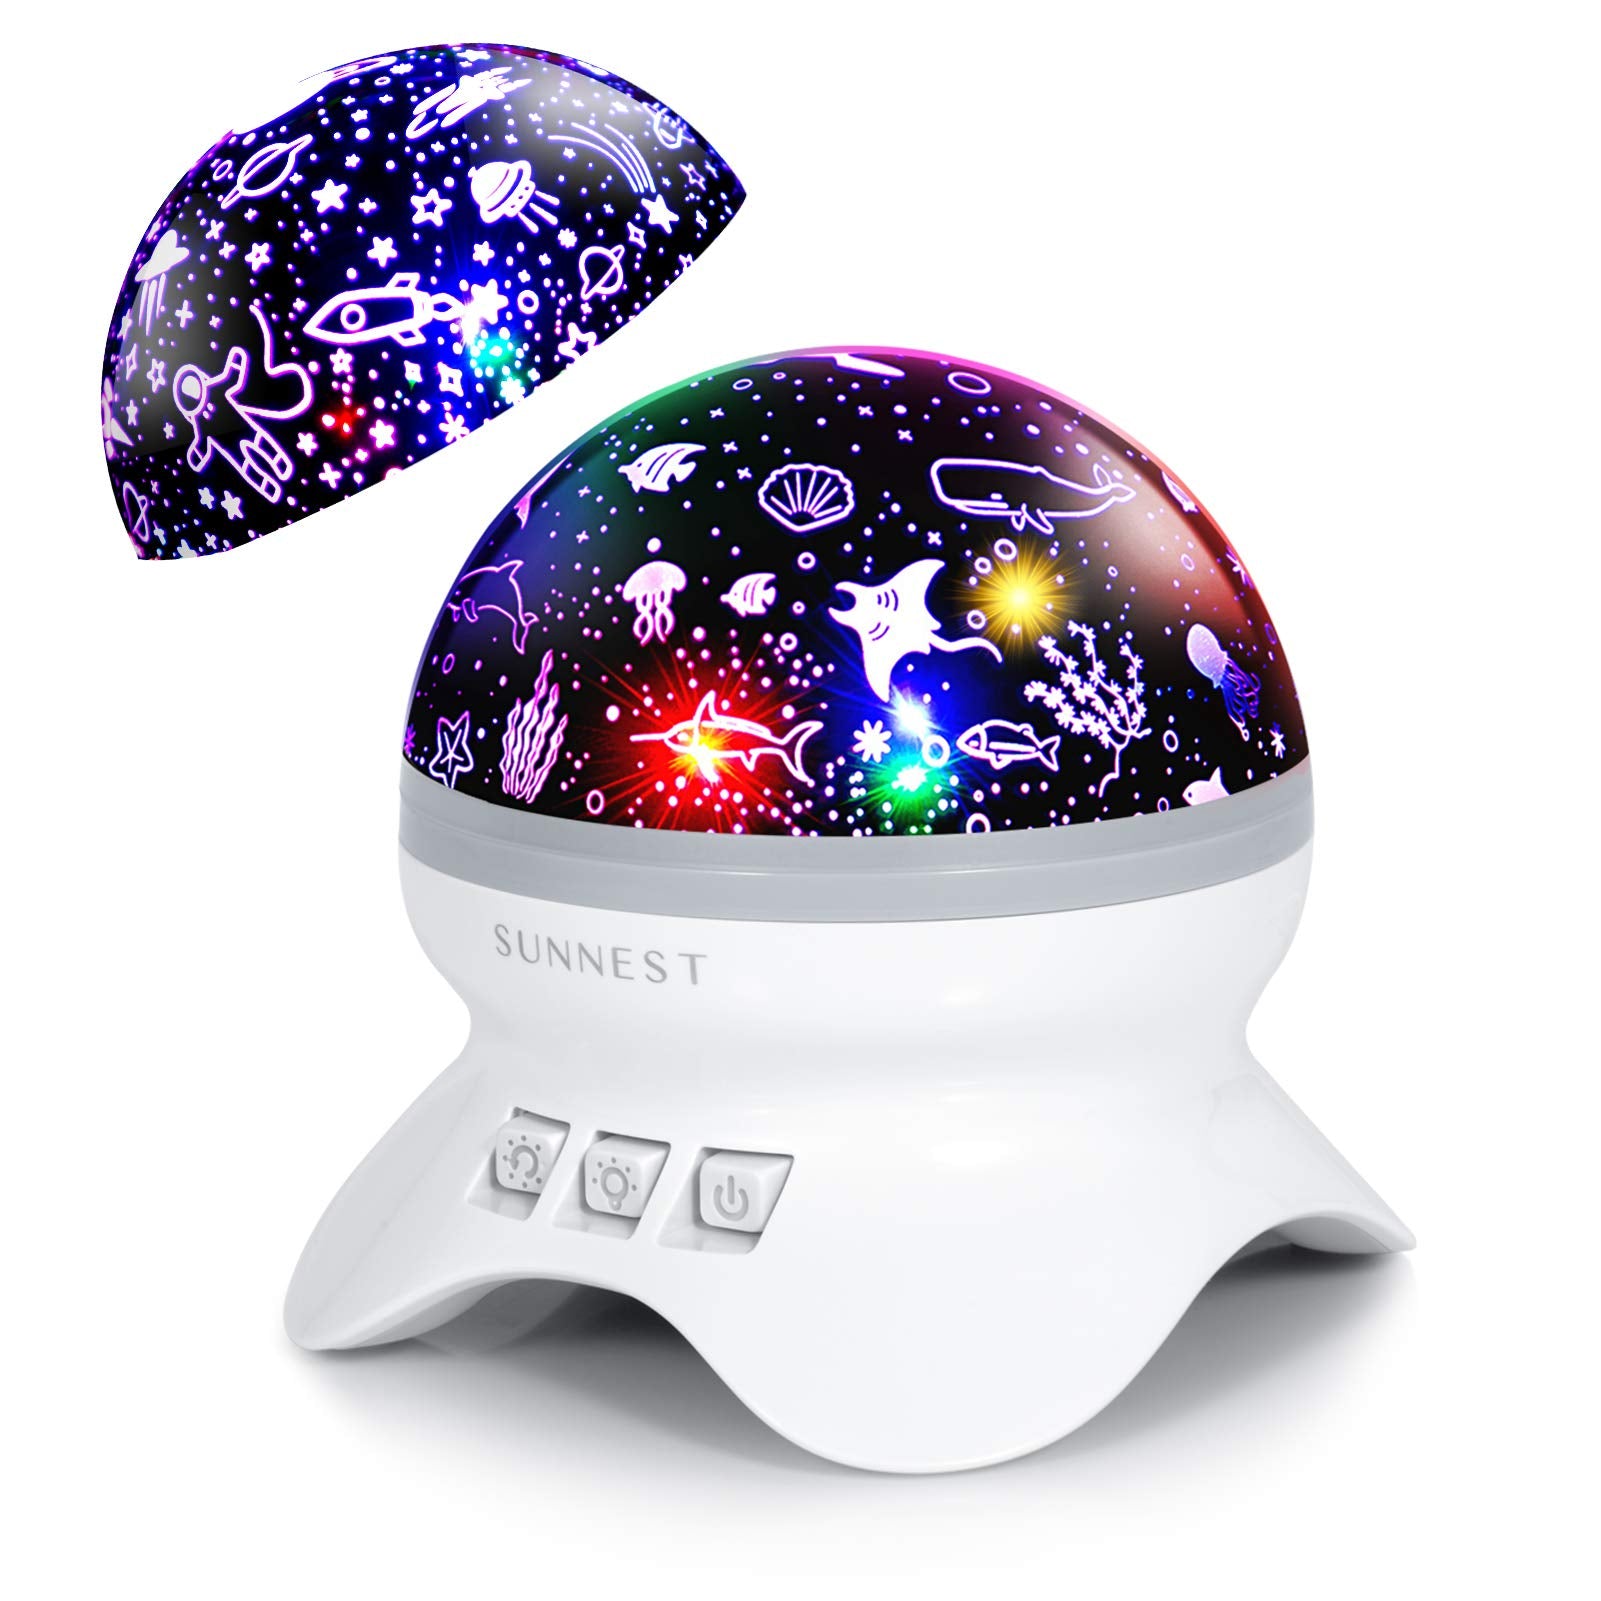 SUNNEST Baby Night Light Kids Projector, Starry Sky Lights Lamp 360 Degree Rotating Space and Ocean Themes with 8 Lighting Modes, Star Projector Gifts for Boys and Girls - White